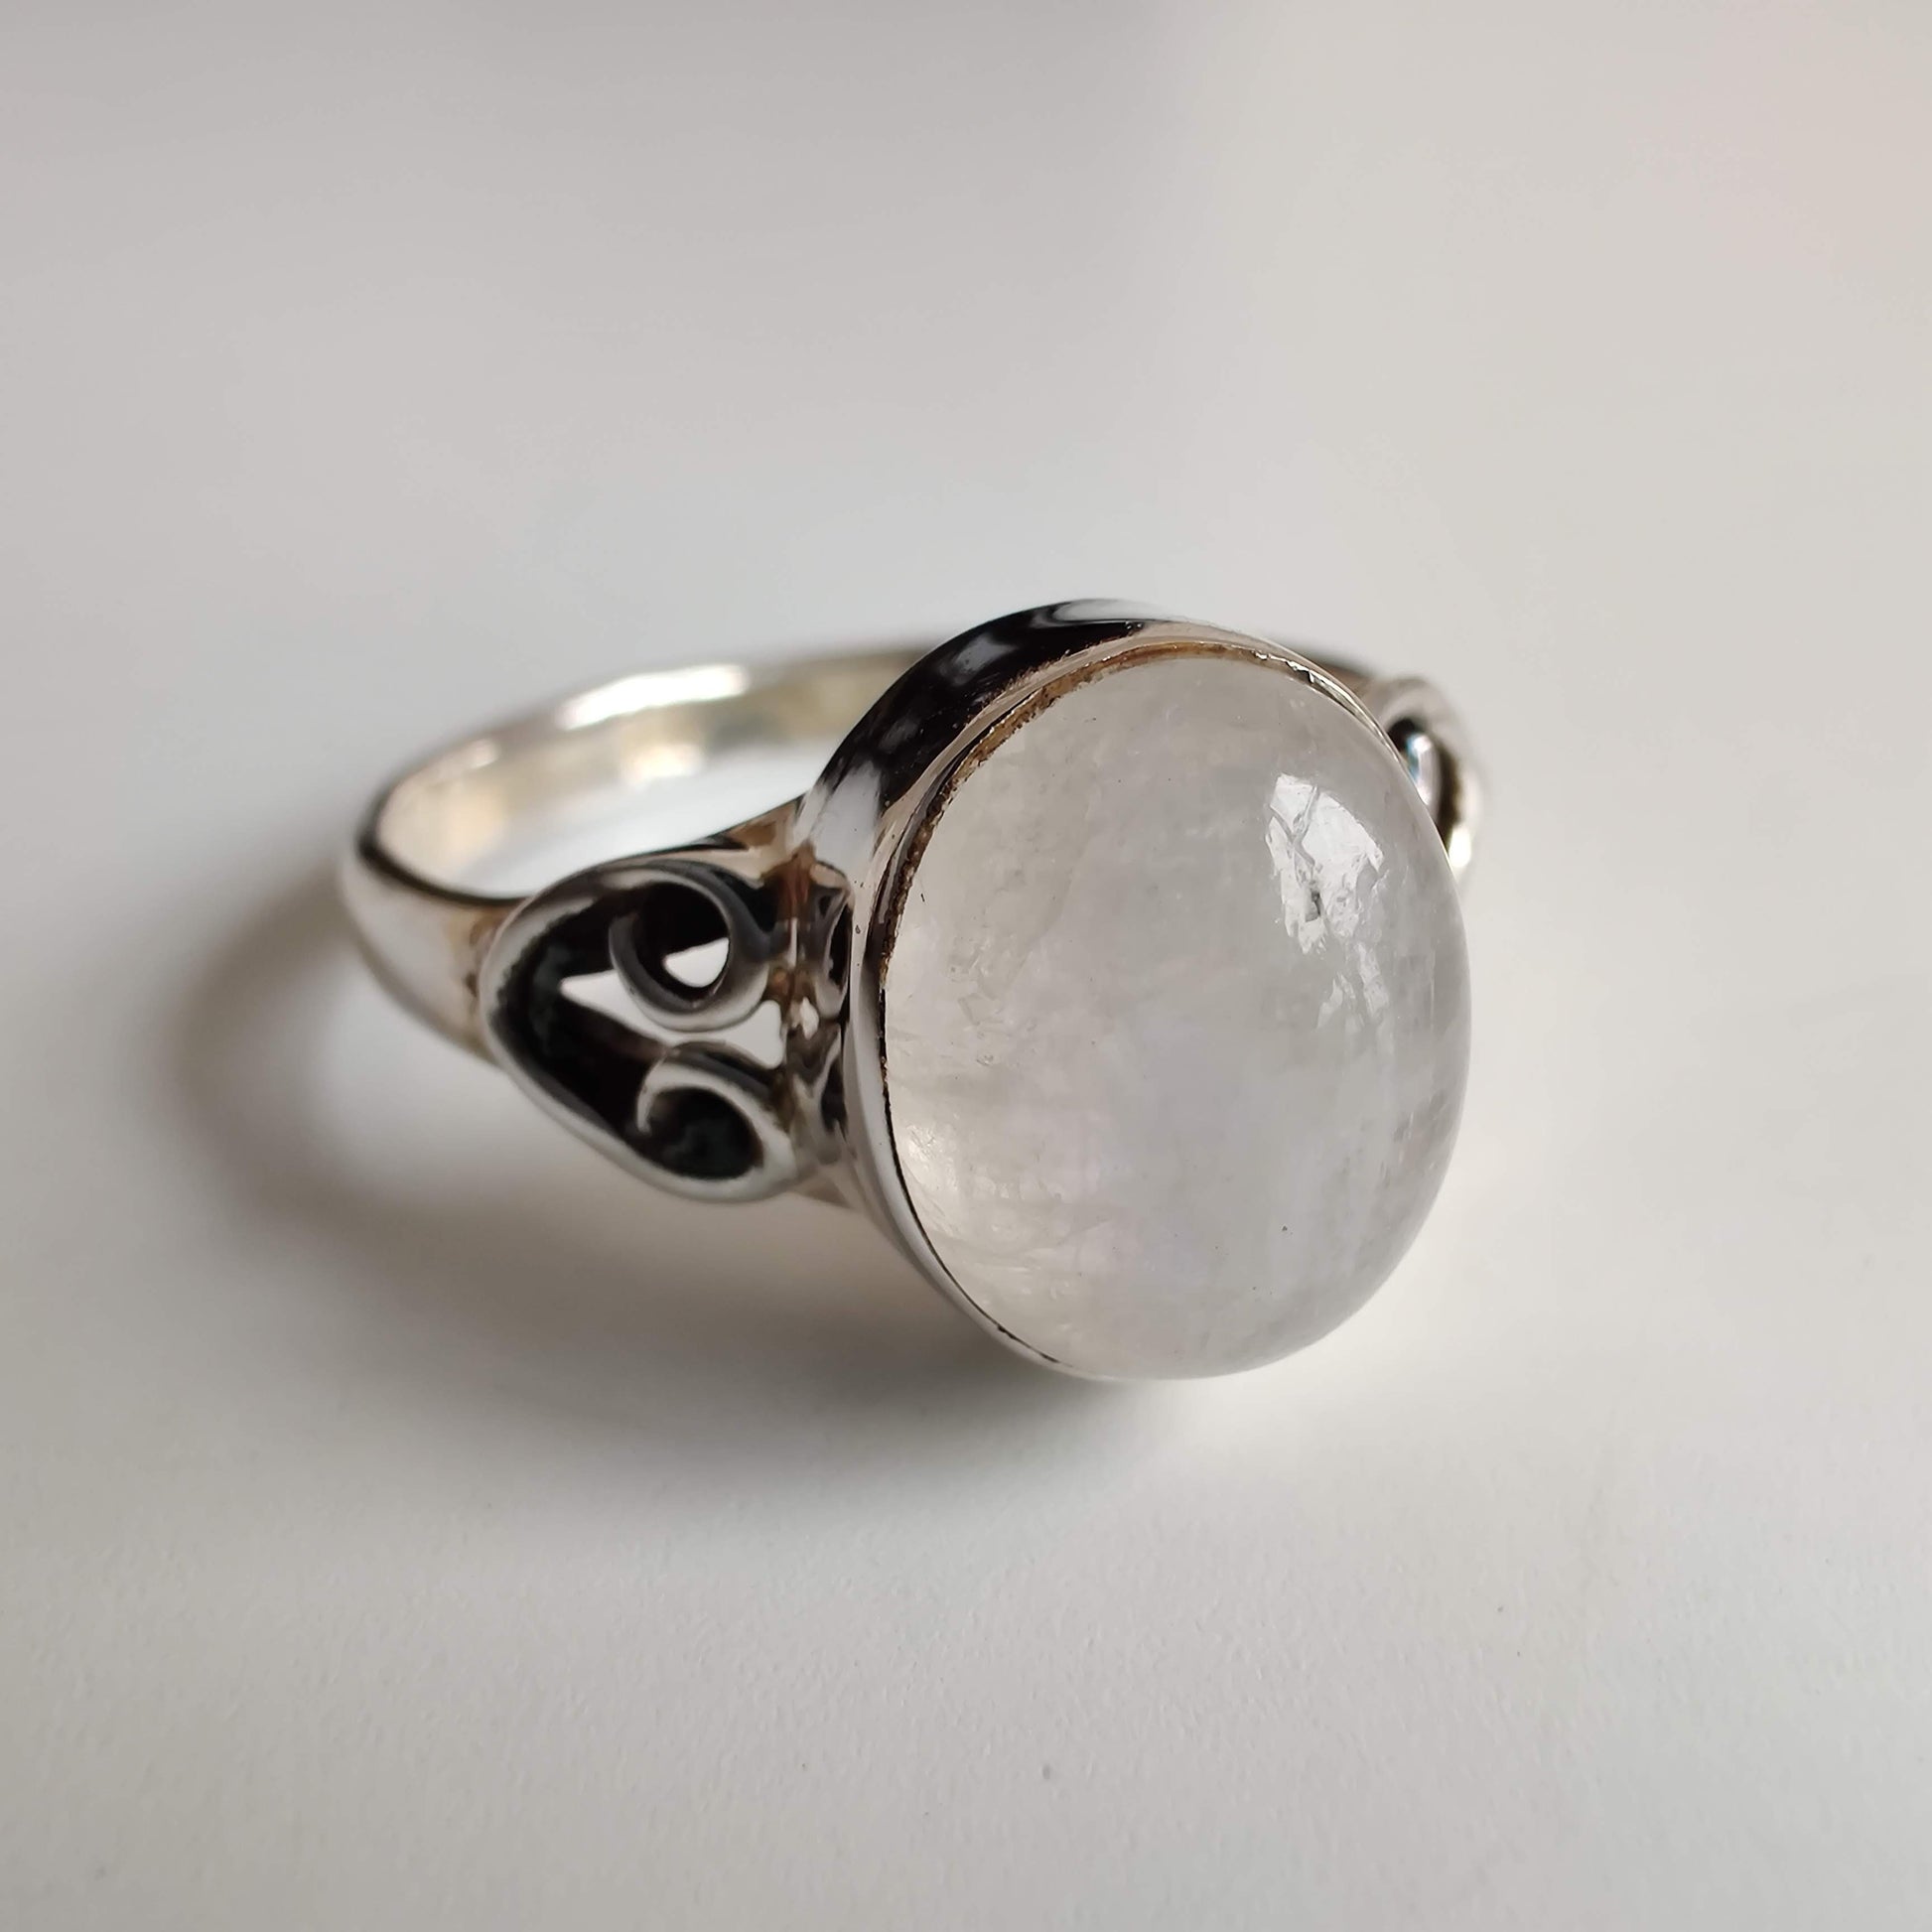 Moonstone Oval 925 Sterling Silver Ring with Heart Design - Rivendell Shop